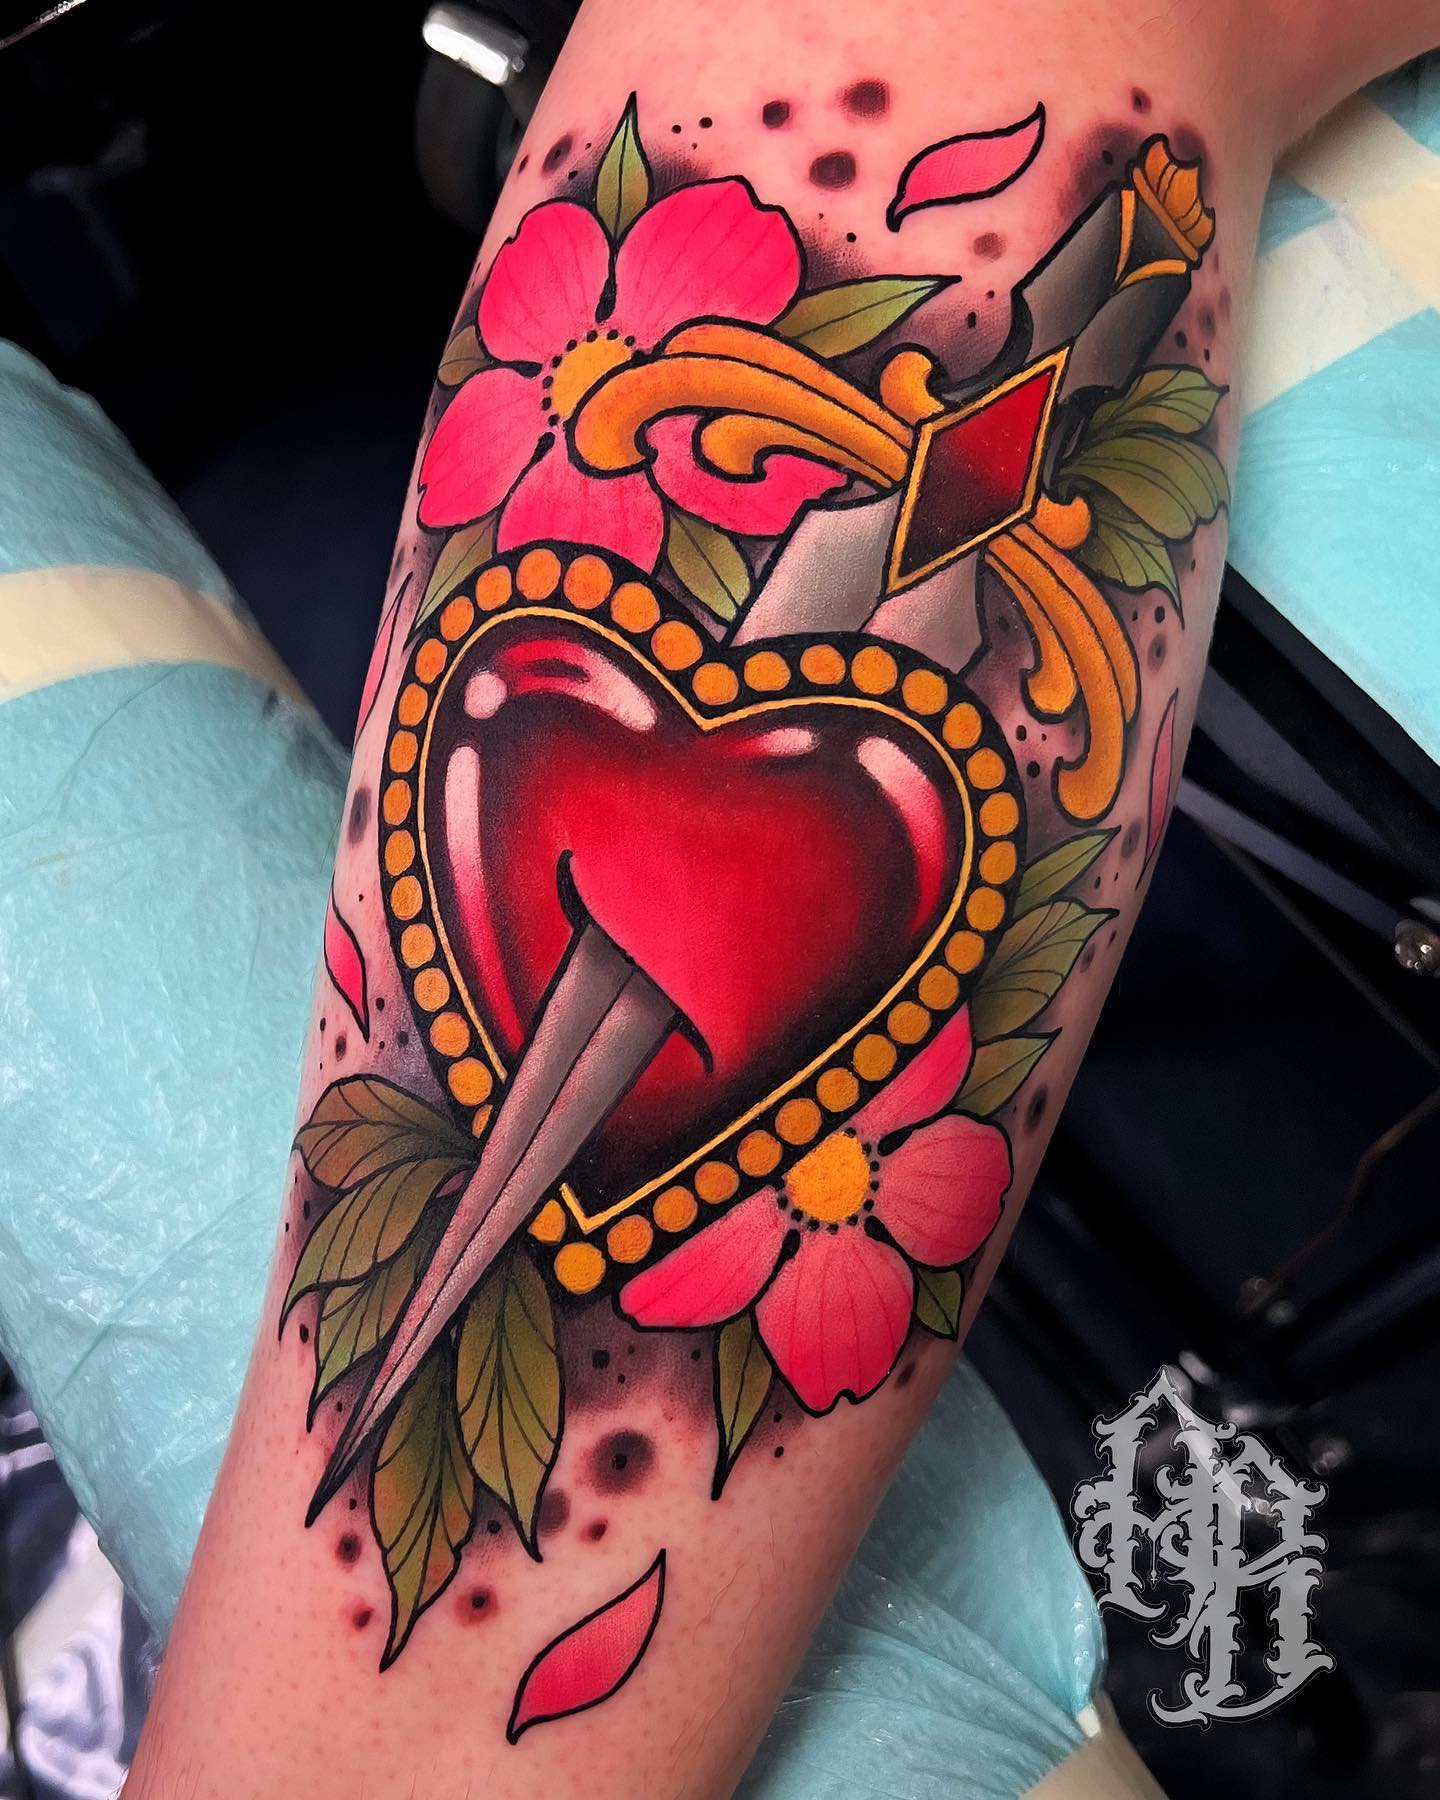 Dagger Heart Tattoo Images Browse 2013 Stock Photos  Vectors Free  Download with Trial  Shutterstock